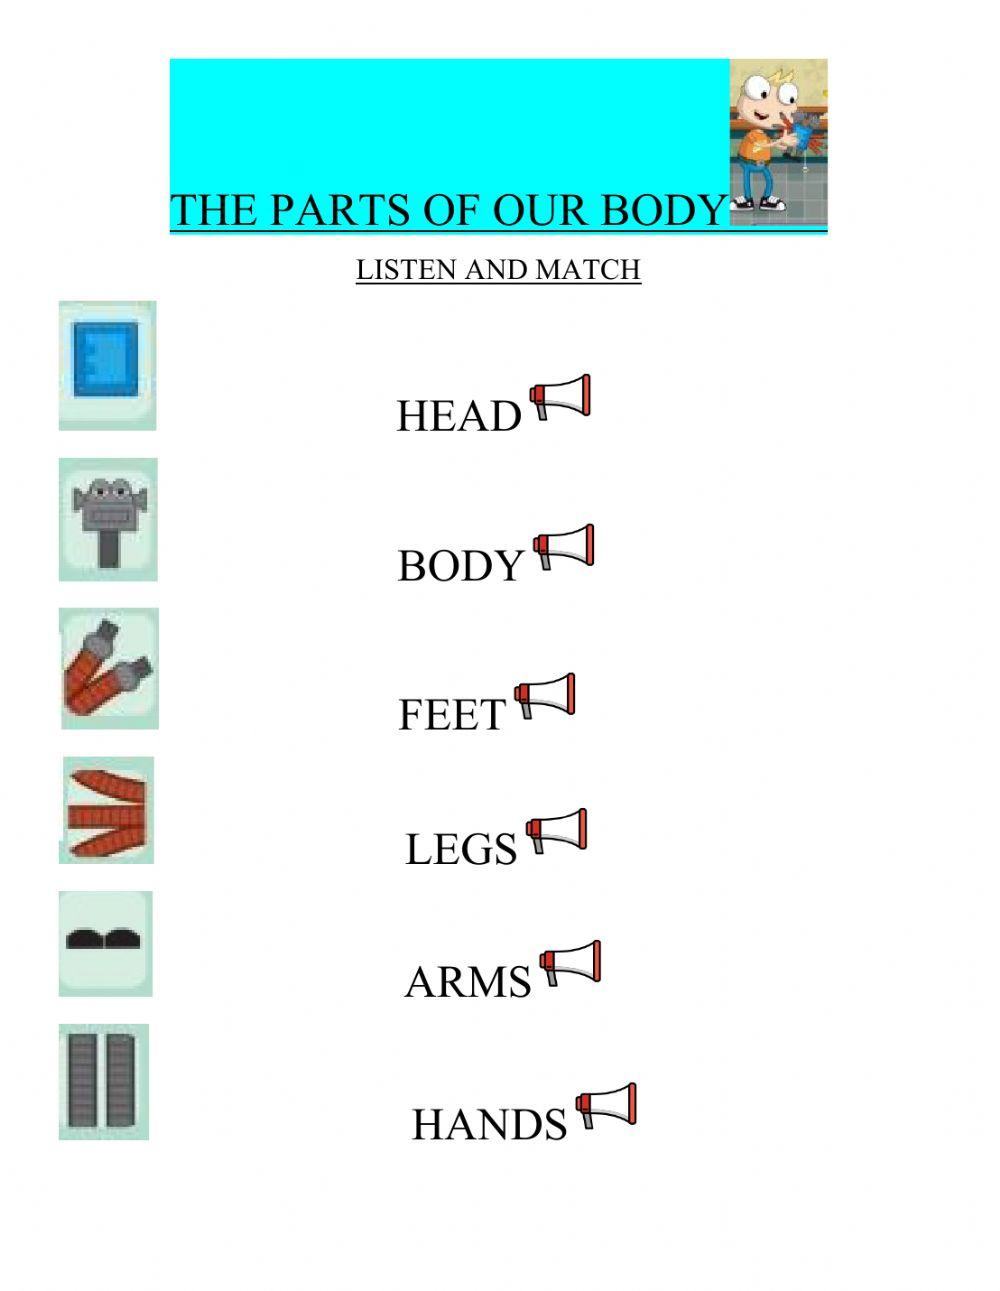 Robot's parts of the body